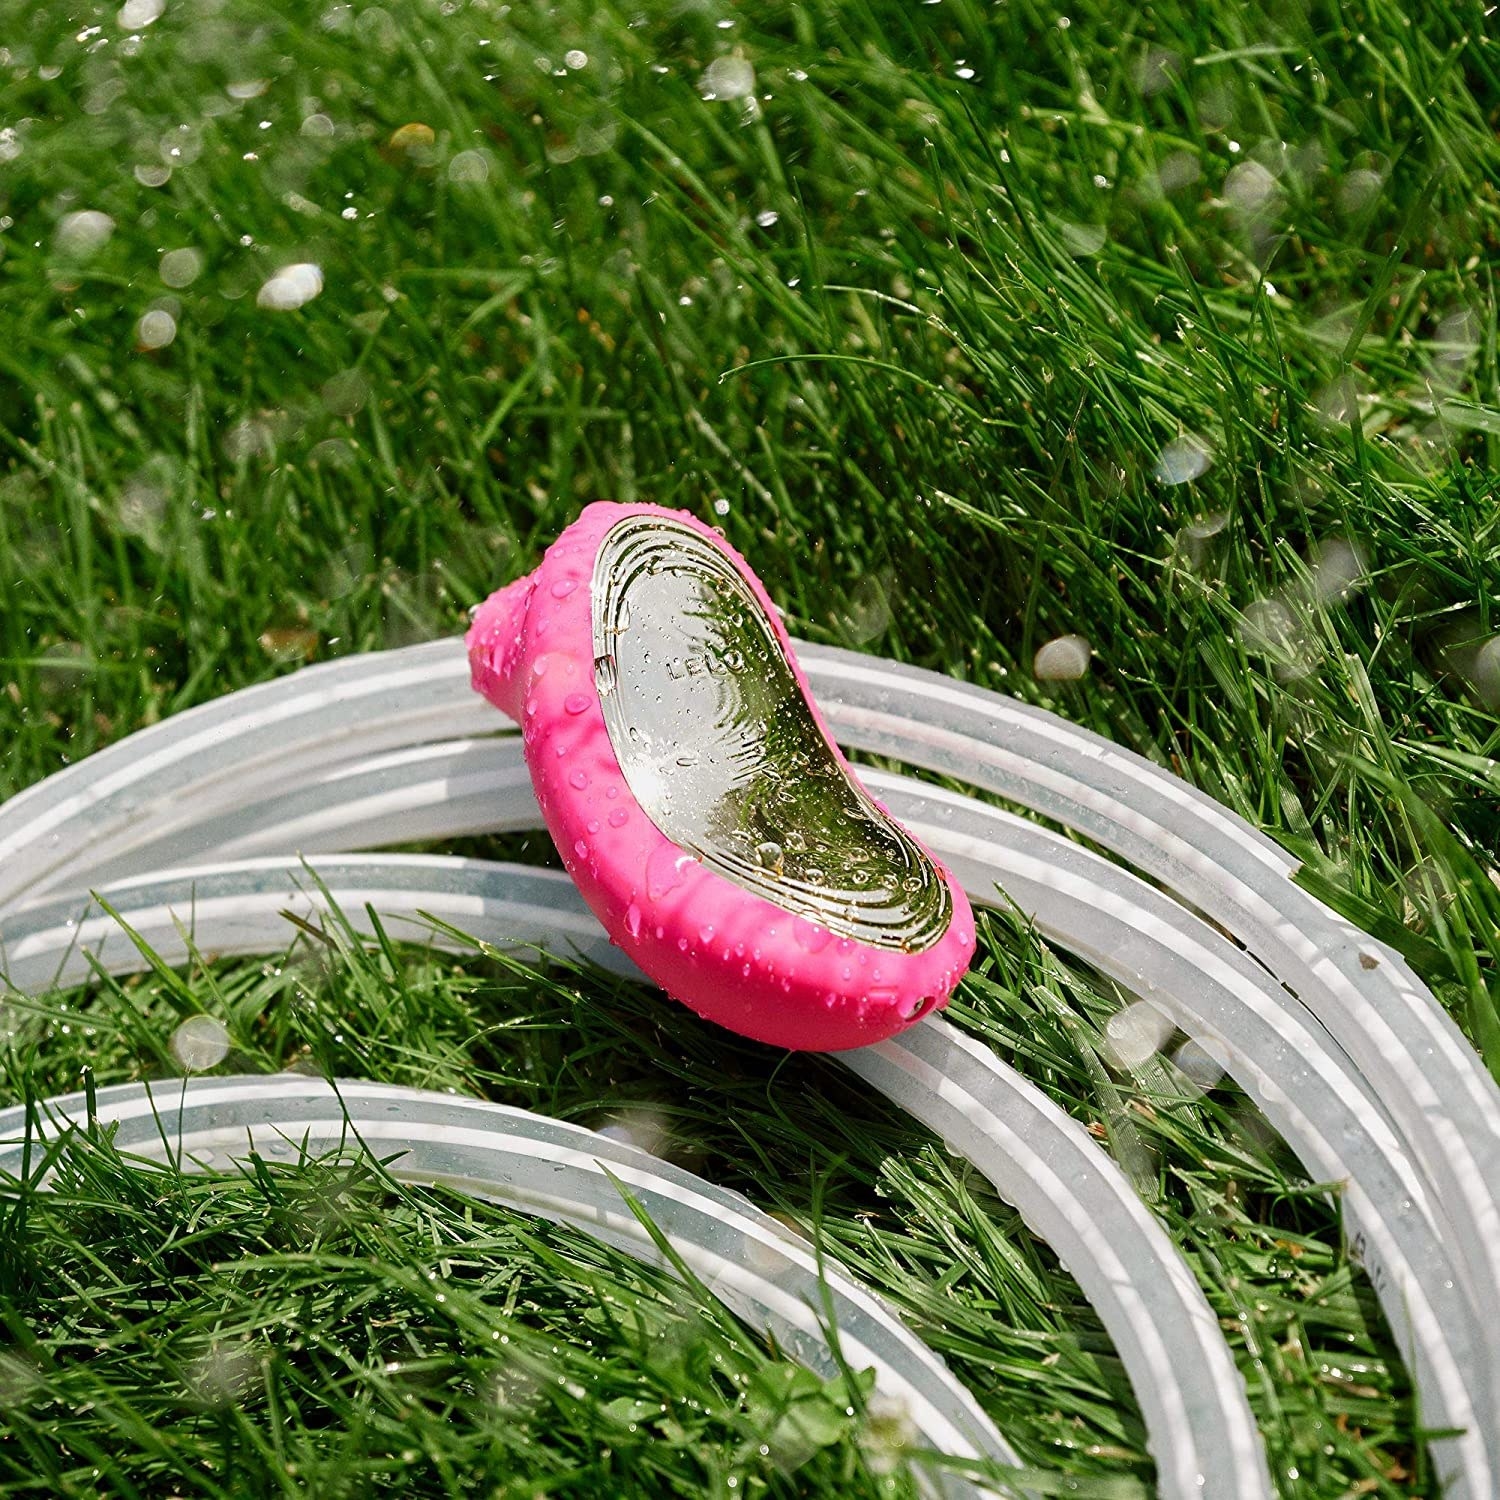 The massager on a garden hose in the grass